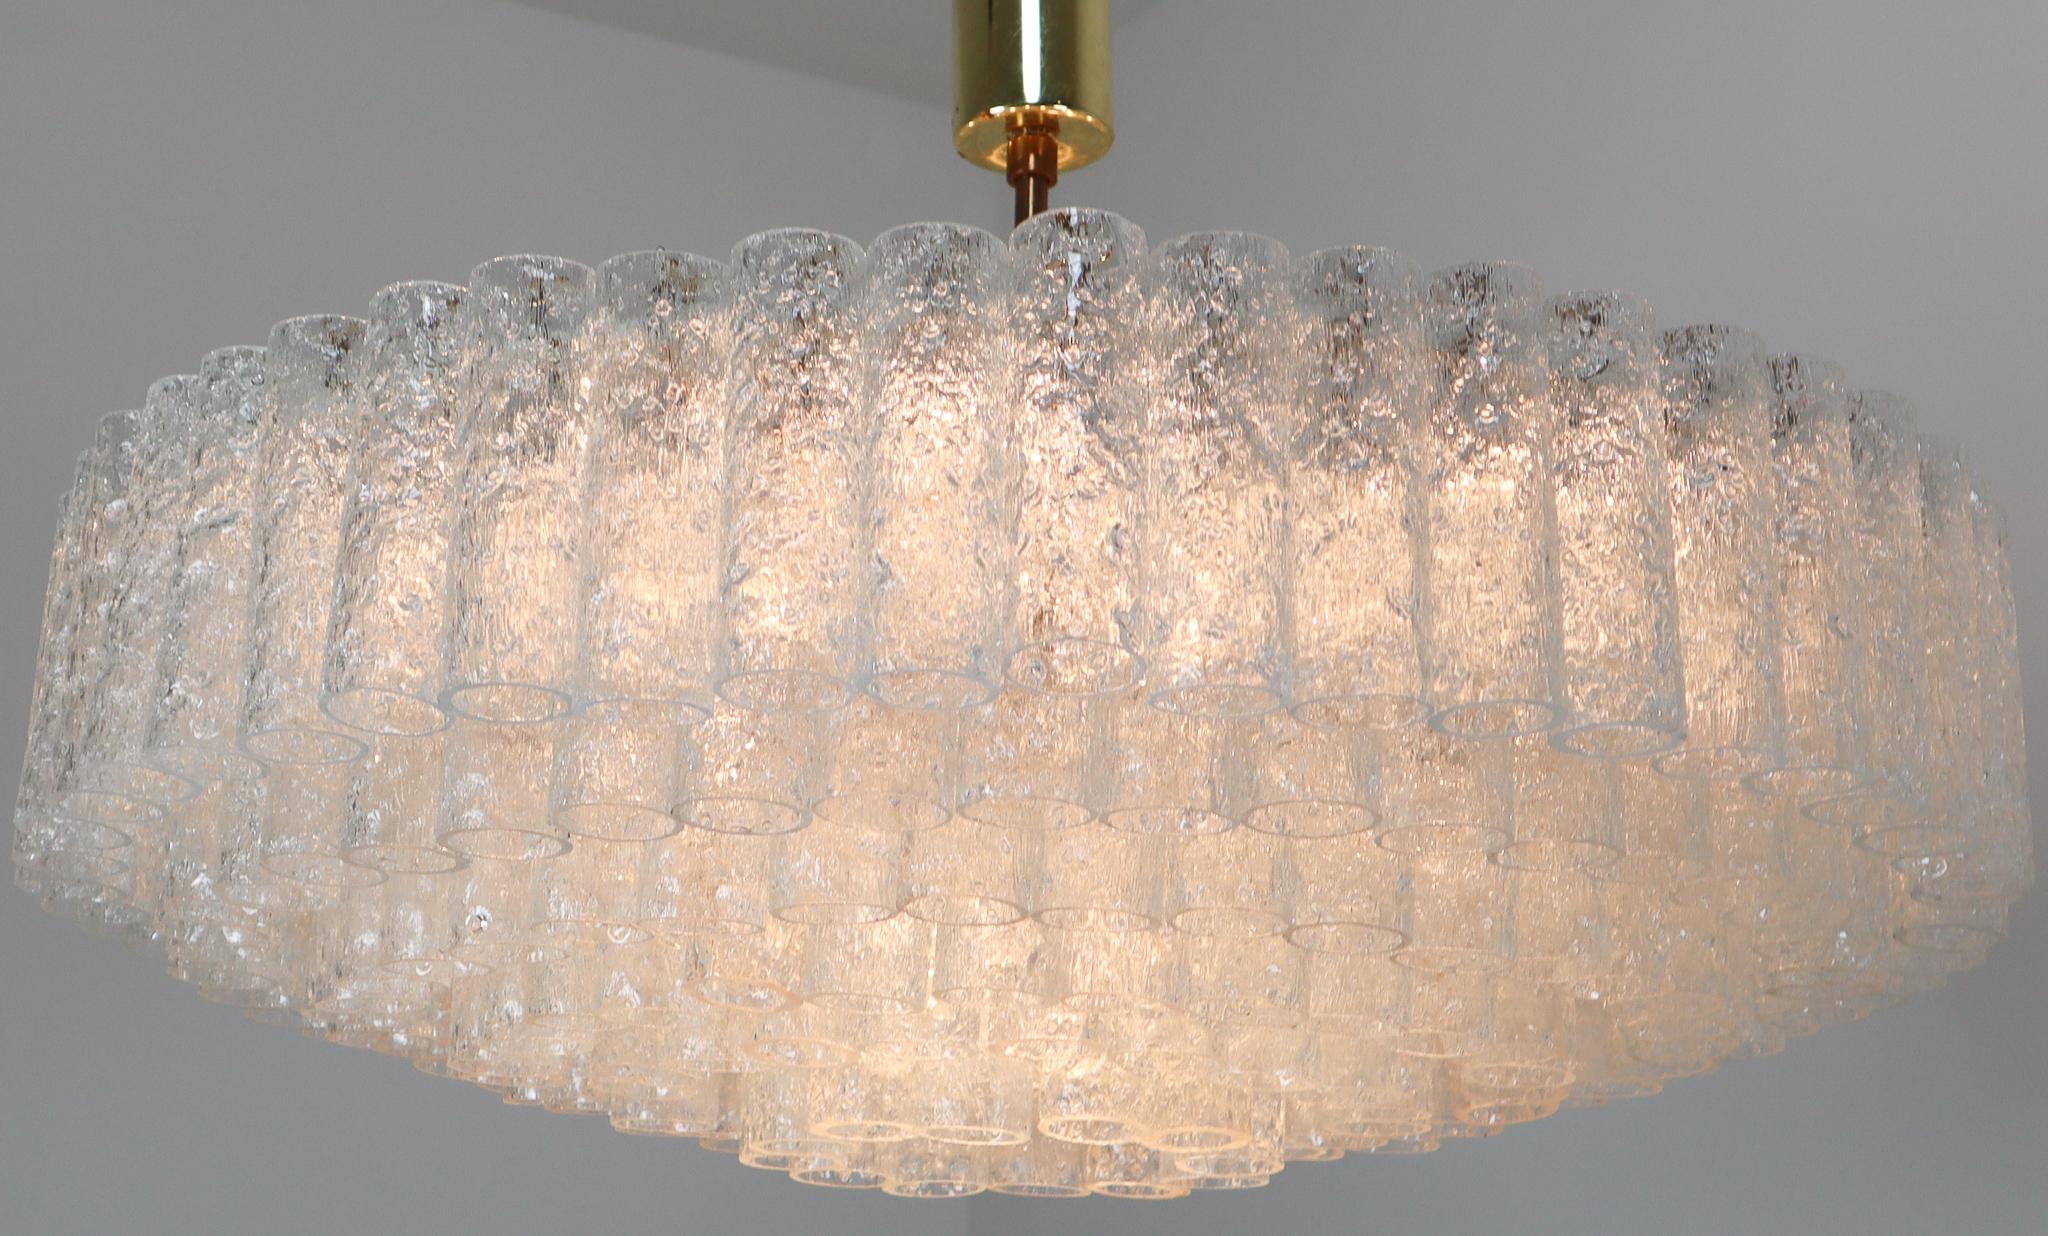 (XL-size) Gorgeous, 1950s midcentury chandeliers was designed by Doria Leuchten, Germany. It features multi-tiered layers of textured ice glass tubes connected to a circular brushed brass frame. The flush mount with almost 200 glass tubes requires